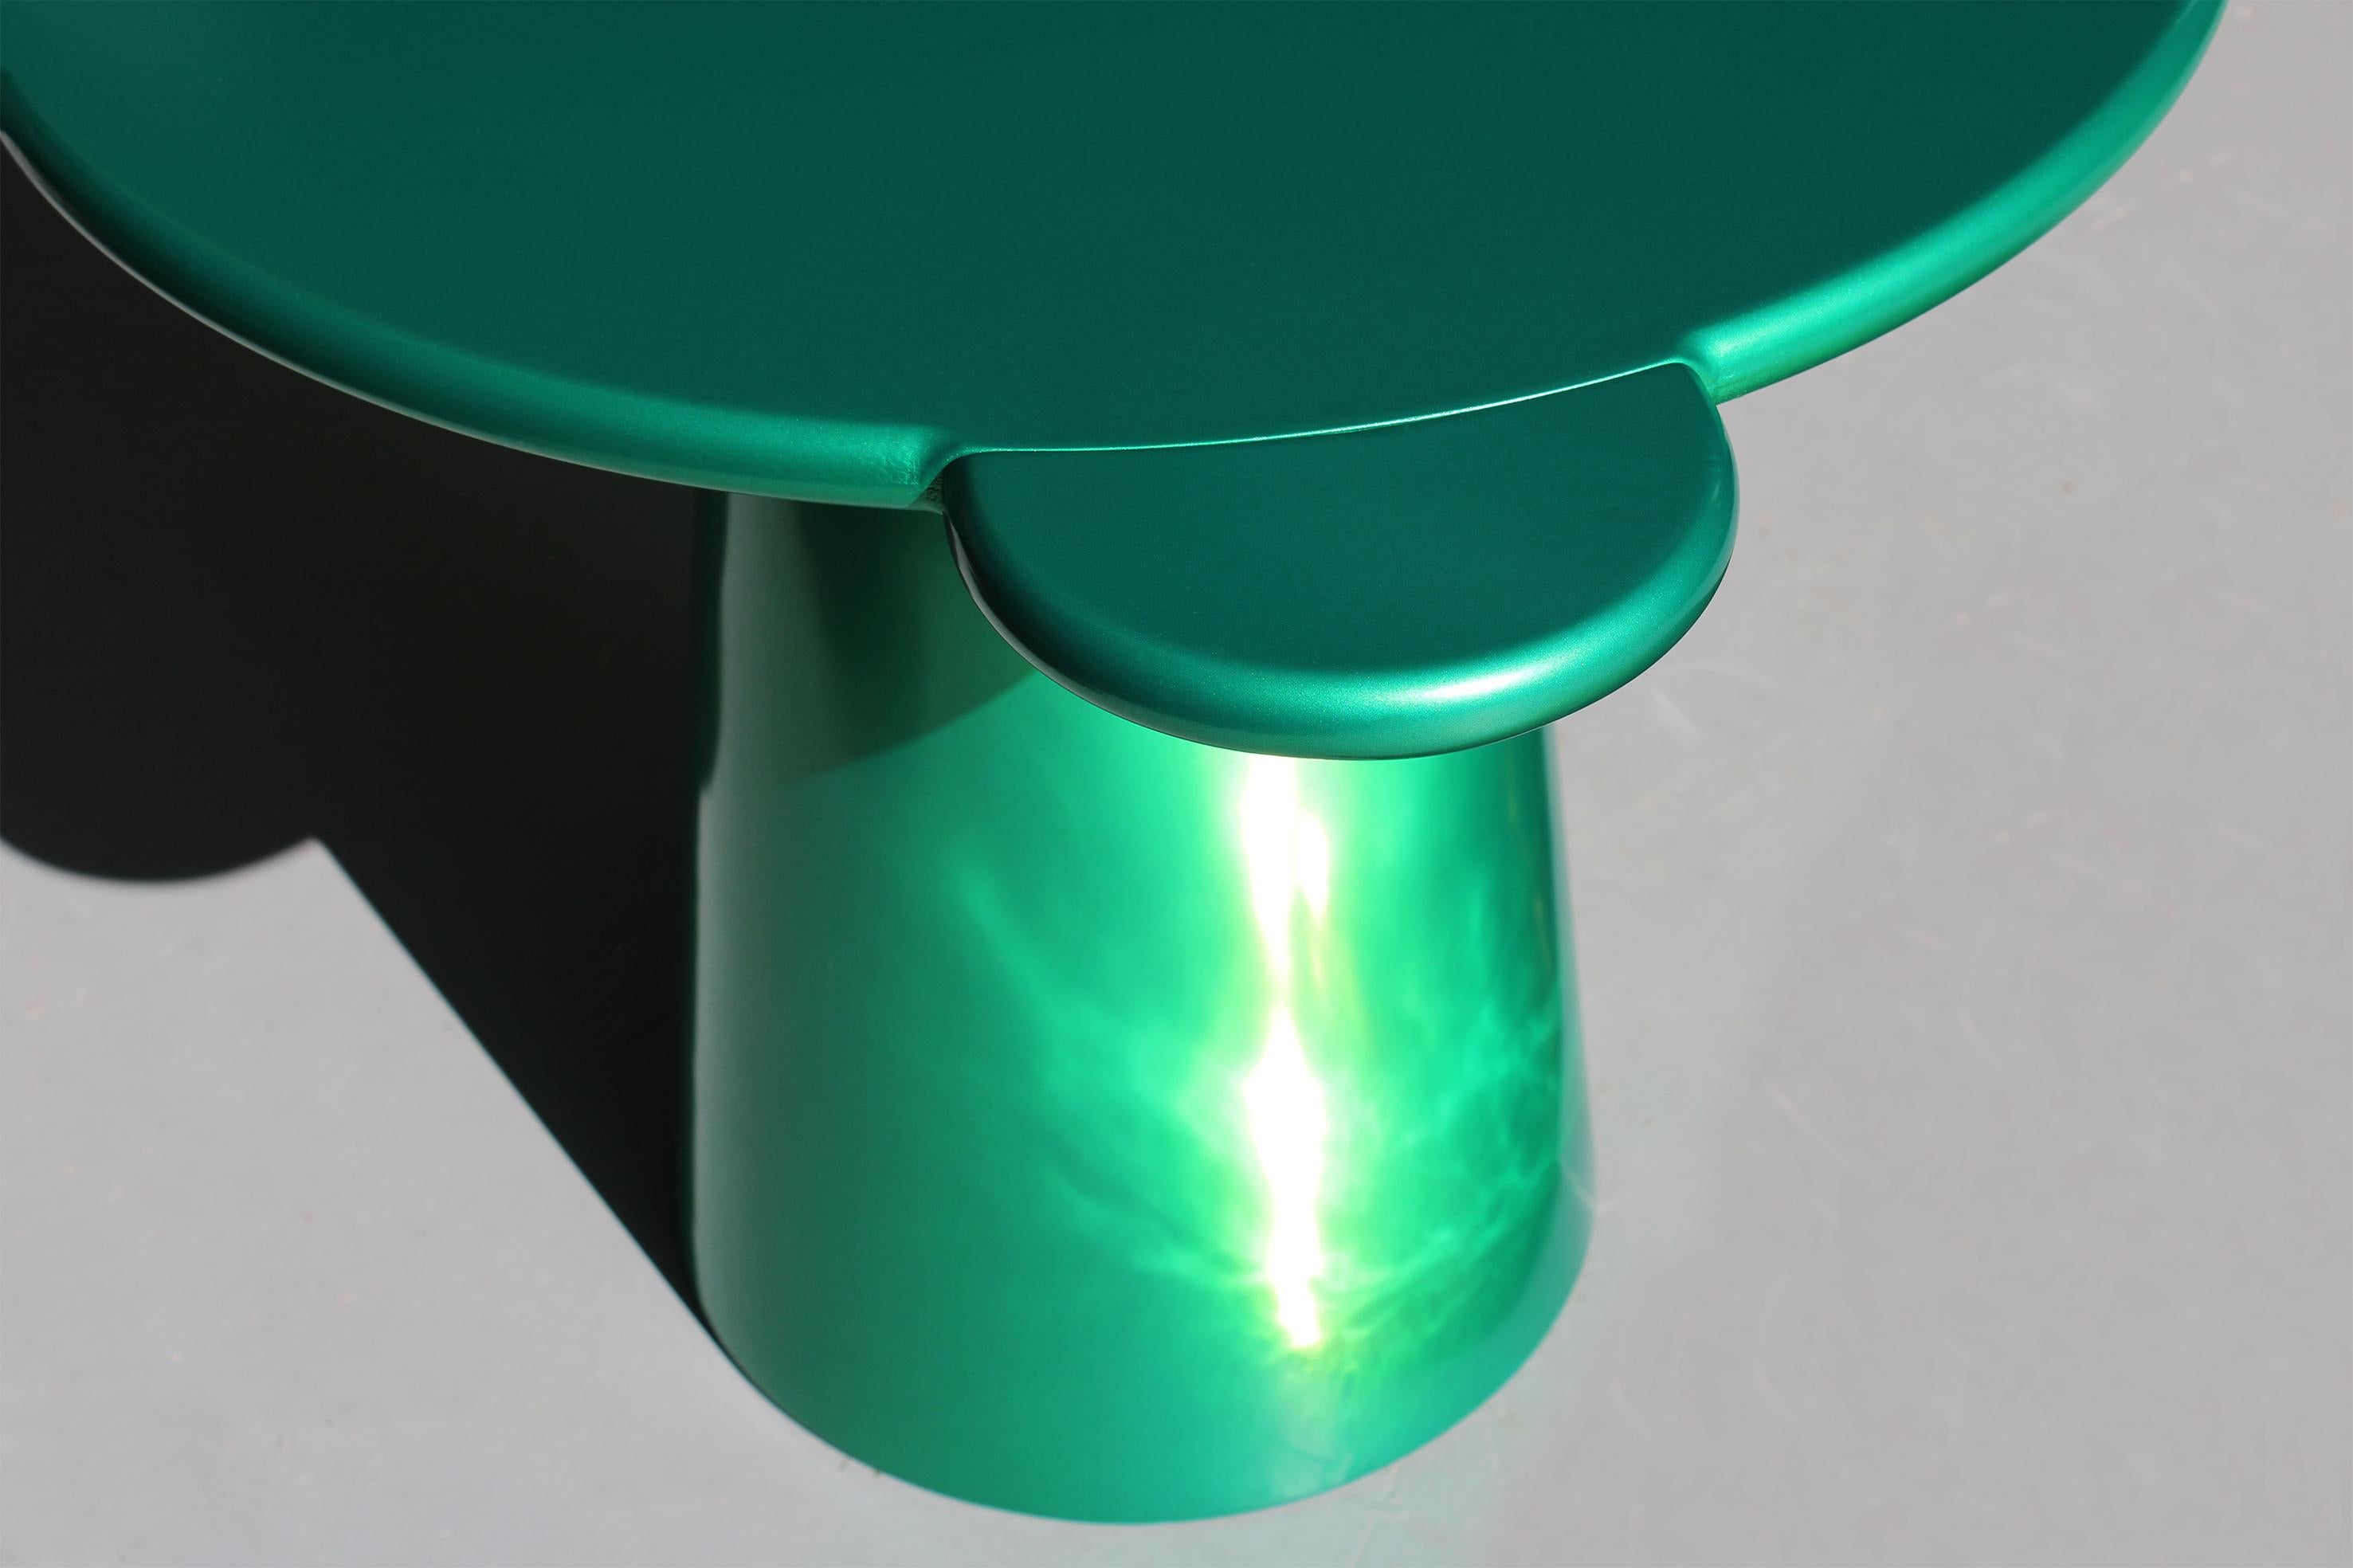 Lacquered Contemporary Coffee Table Green Donald Wood by Chapel Petrassi For Sale